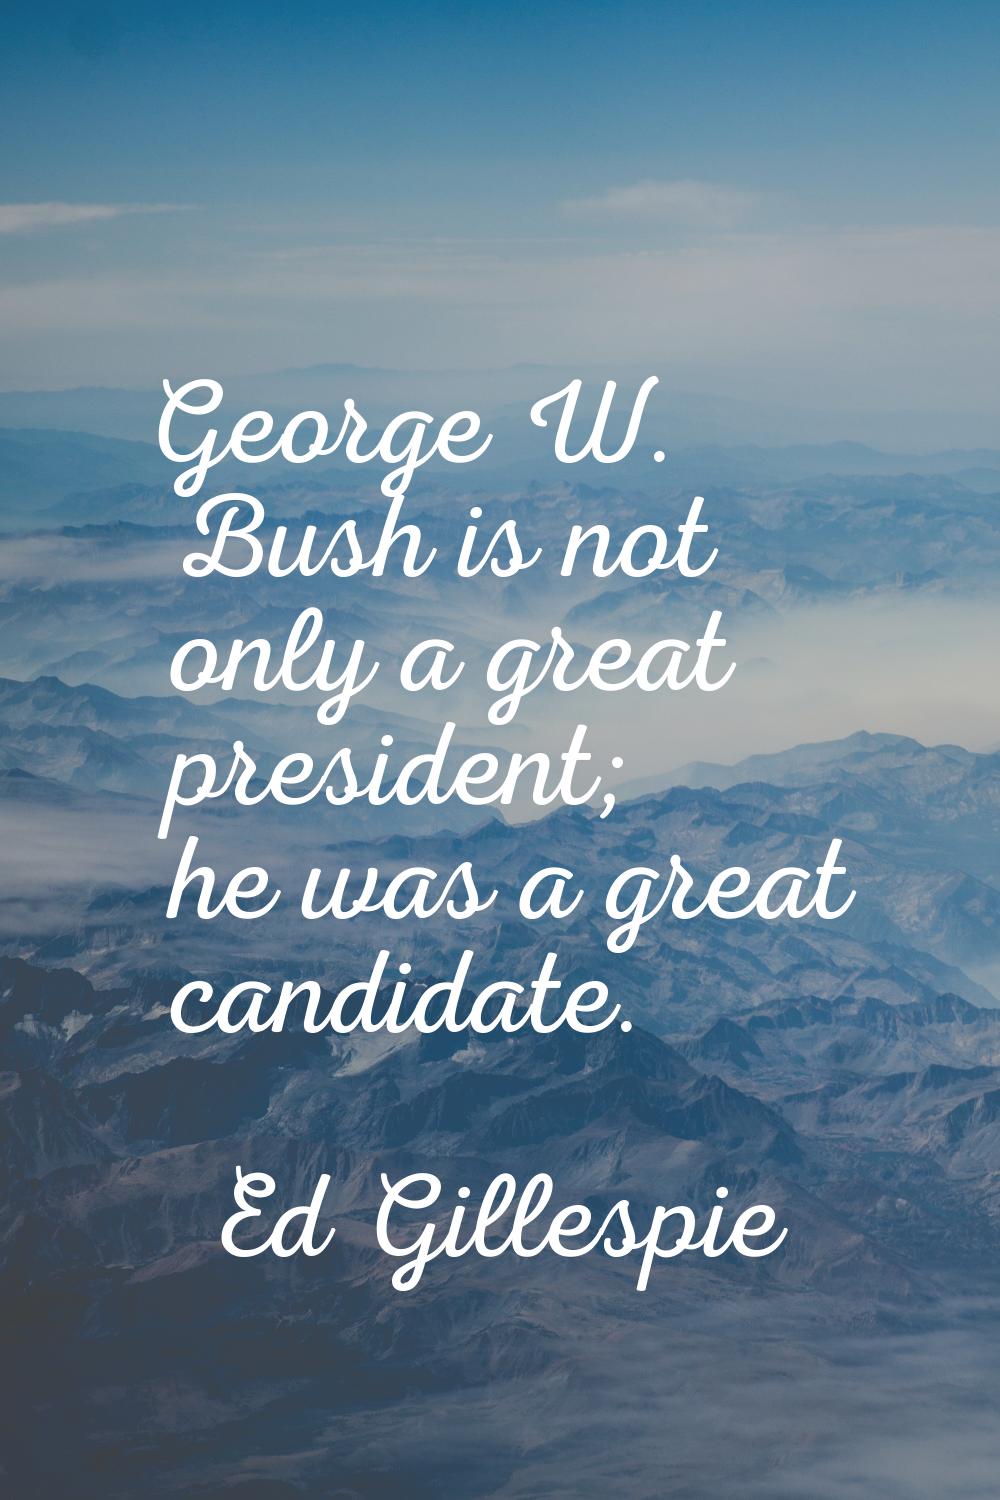 George W. Bush is not only a great president; he was a great candidate.